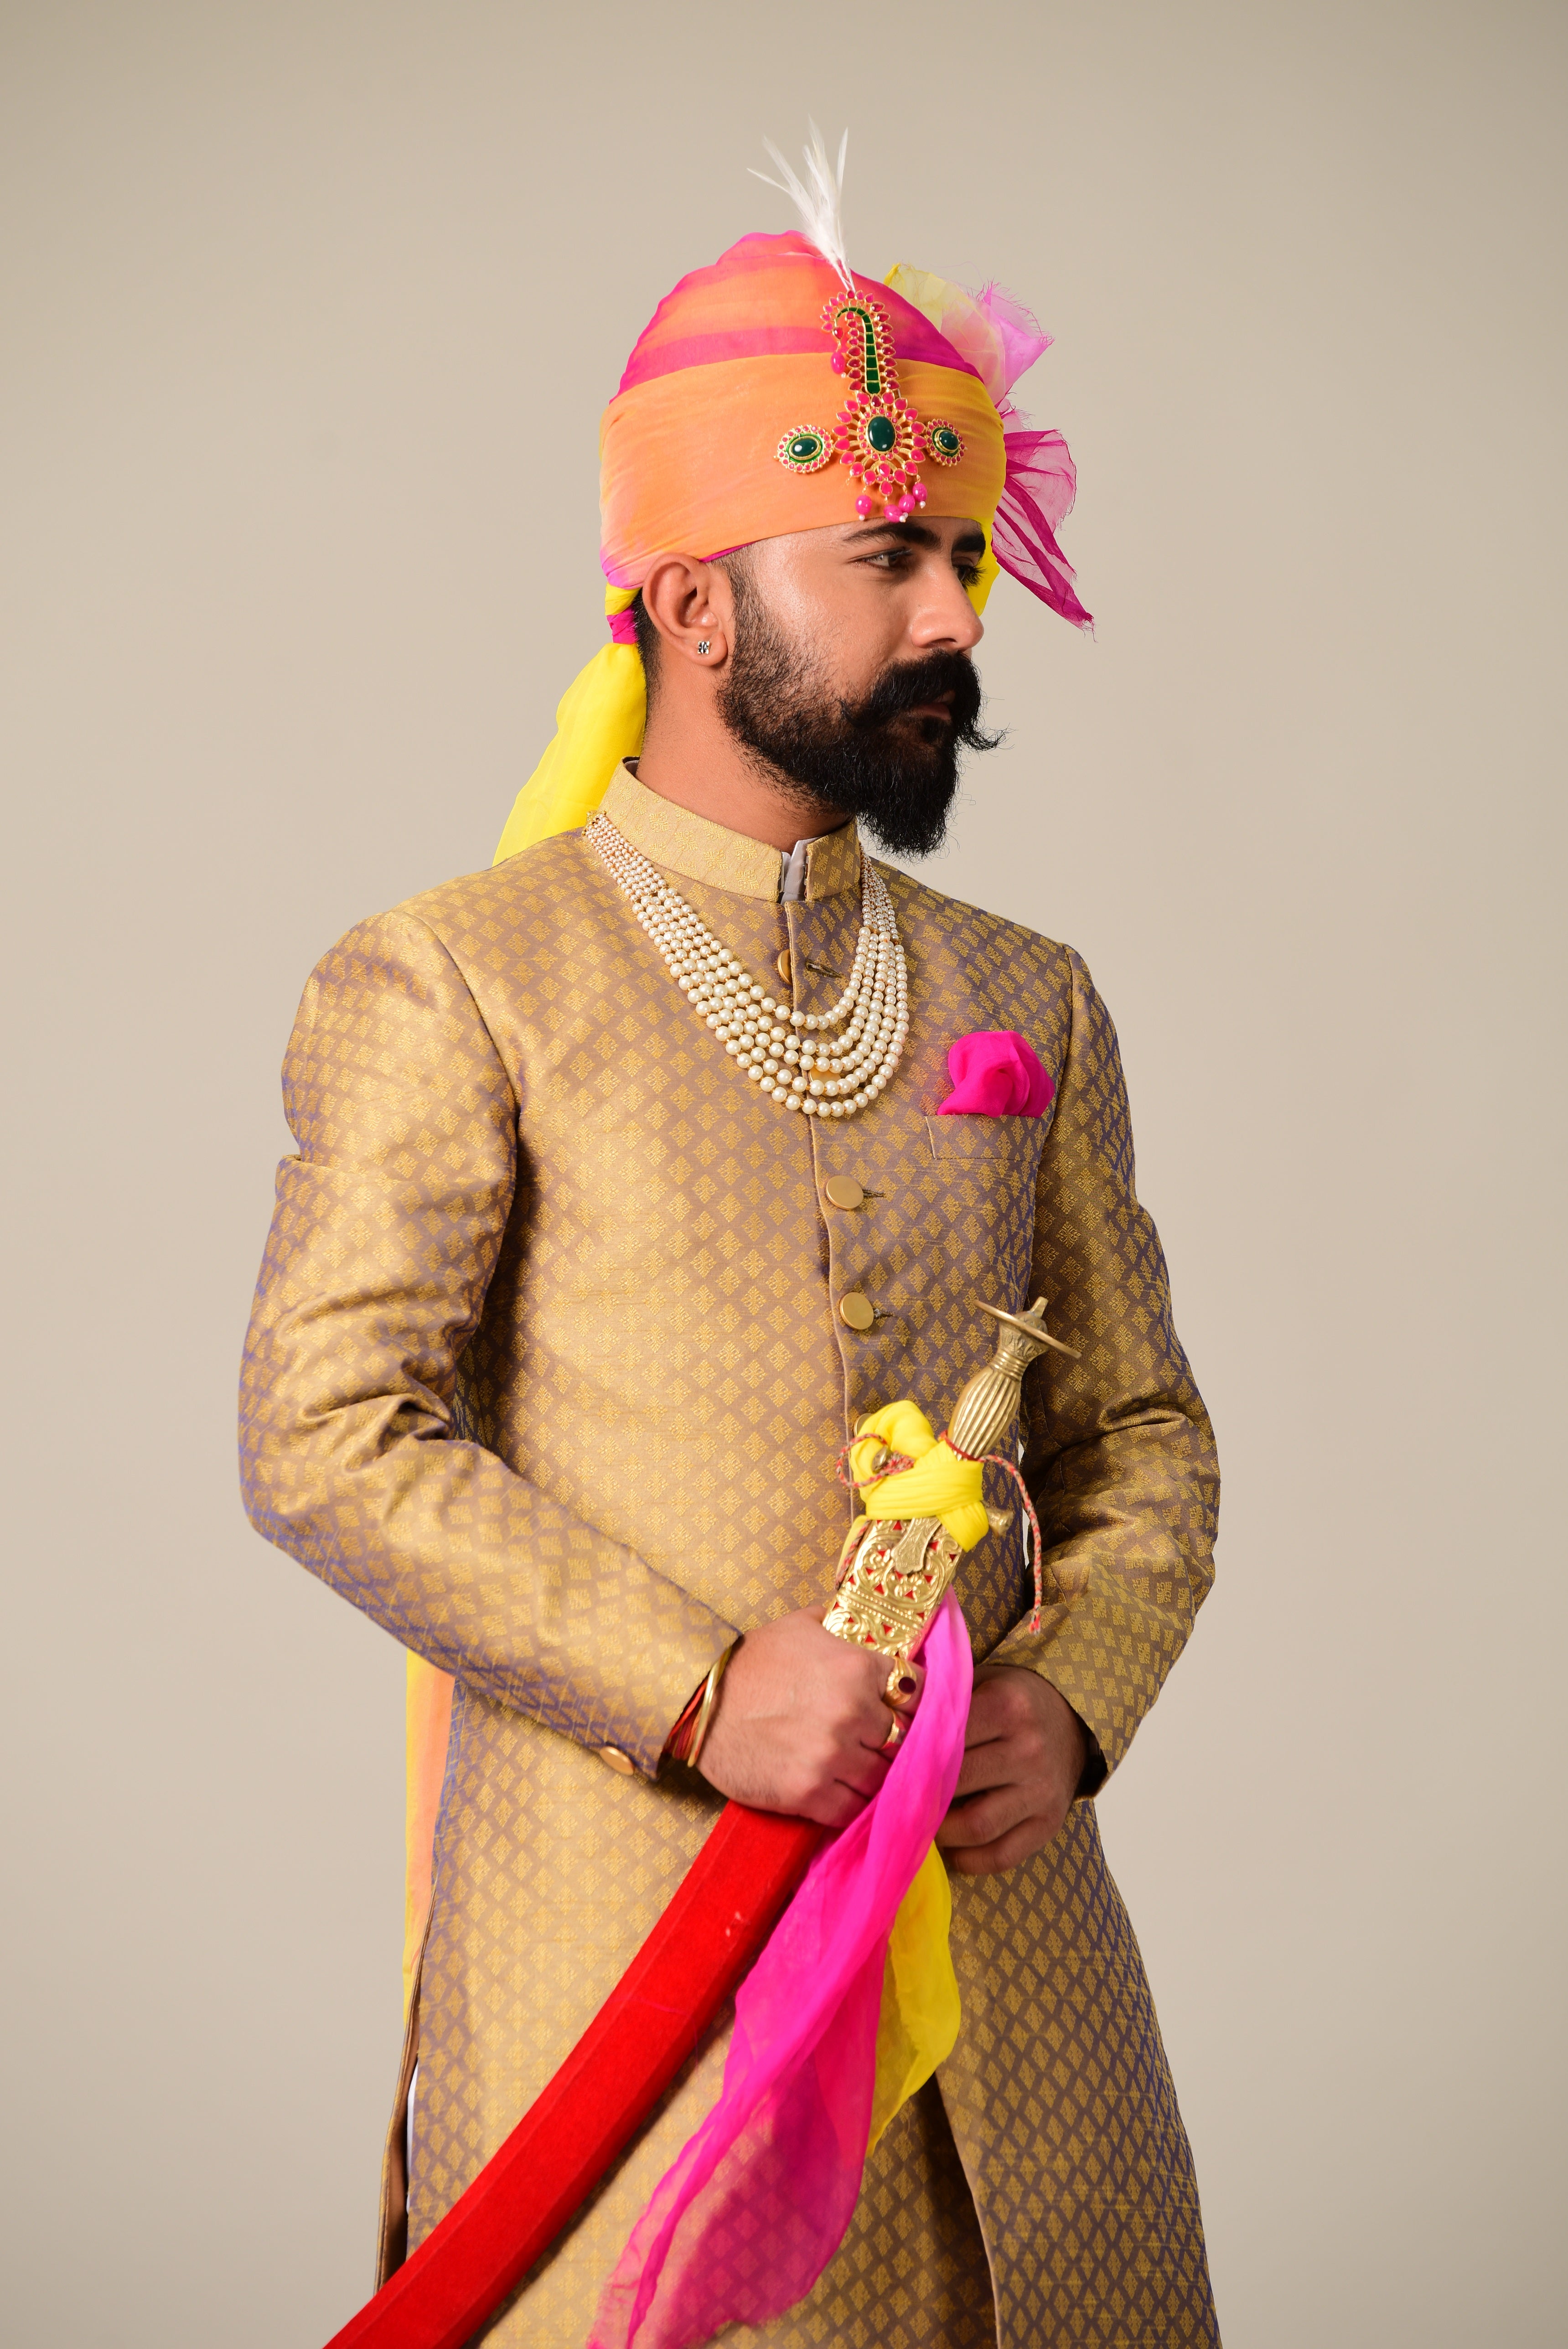 Traditional Golden-Violet Hand-crafted Brocade Silk Sherwani Achkan for Men |Formal Kurta Style wear | Perfect for Family Weddings & Grooms